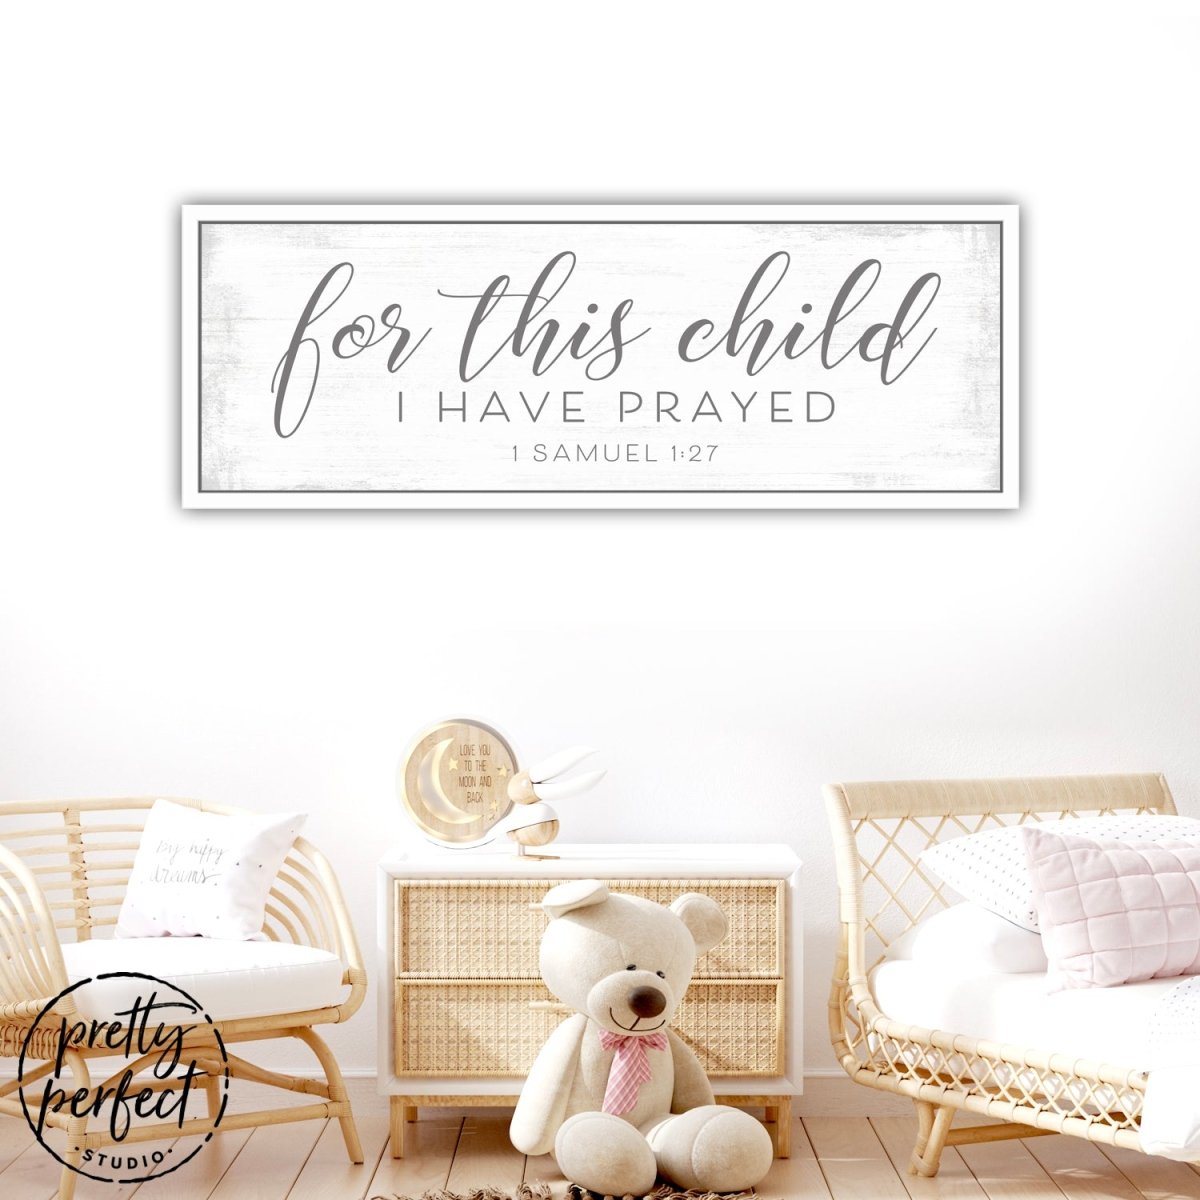 For This Child I Have Prayed Quote Sign In Children's Room - Pretty Perfect Studio